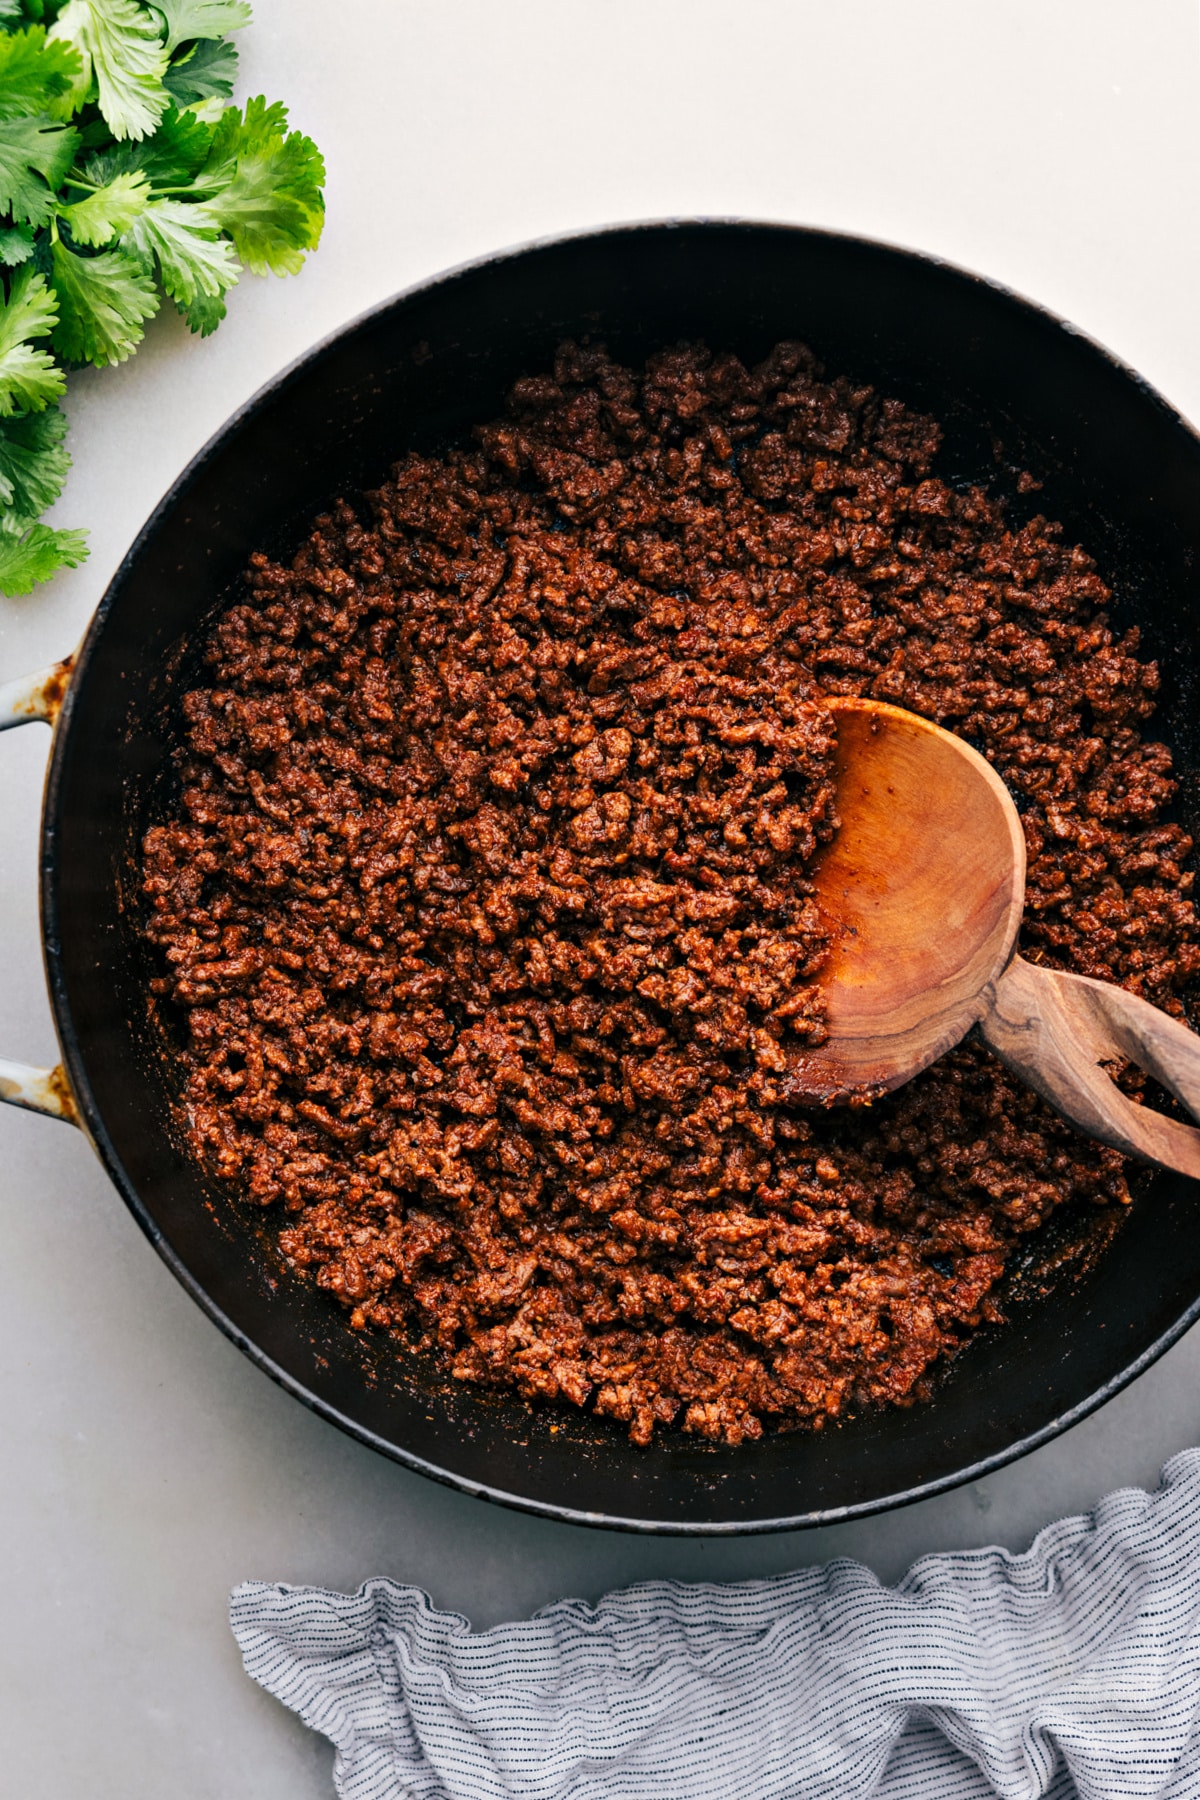 Taco Meat Recipe in the pan ready to be served.